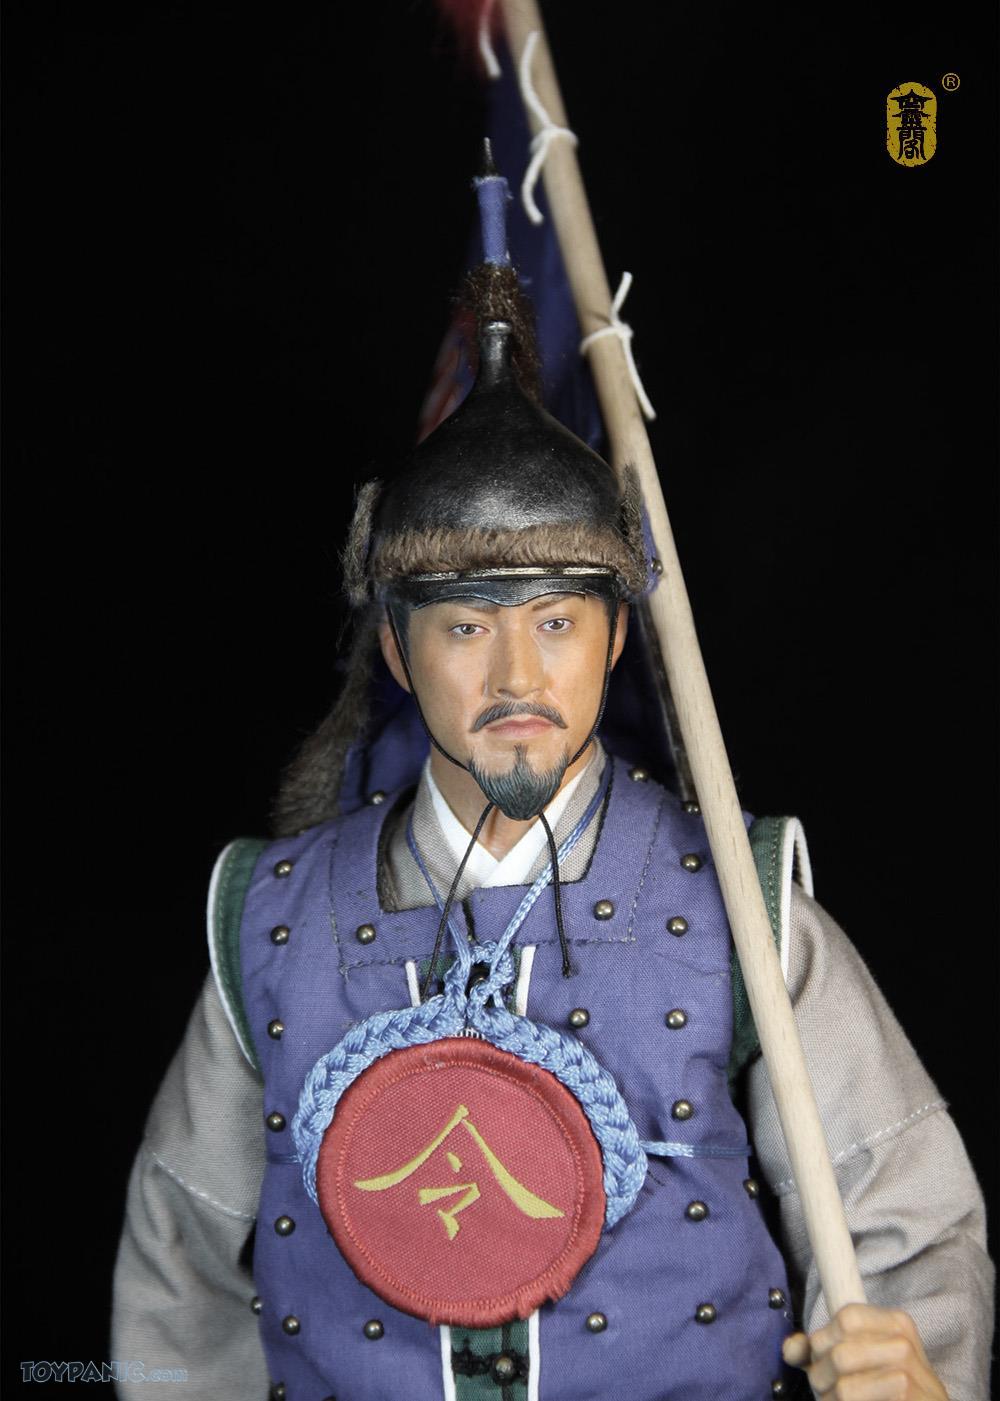 clothing - NEW PRODUCT: KONG LING GE (KLG-DK001): 1/6 Ming Dynasty series Commander Costume & Equipment 10162012